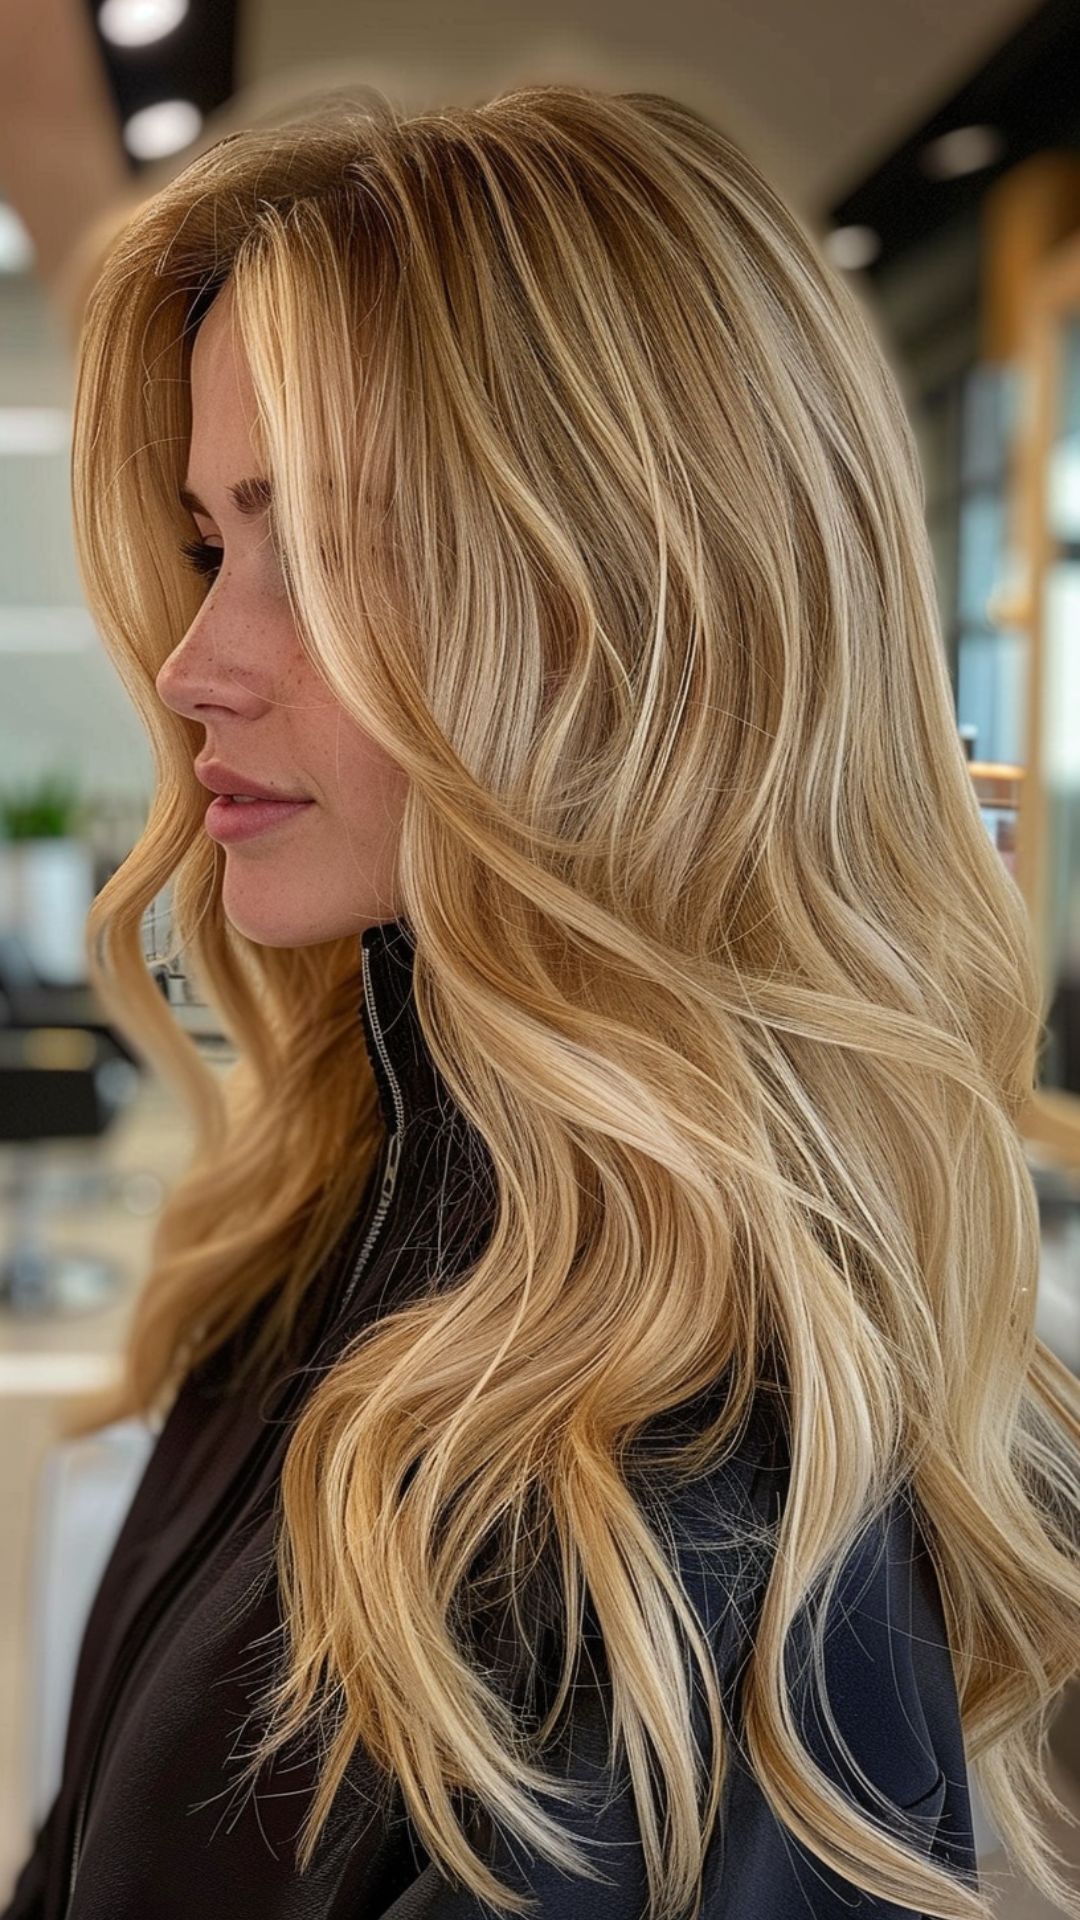 Exploring the Spectrum of Blonde Hair Shades: From Platinum to Honey and Everything In Between